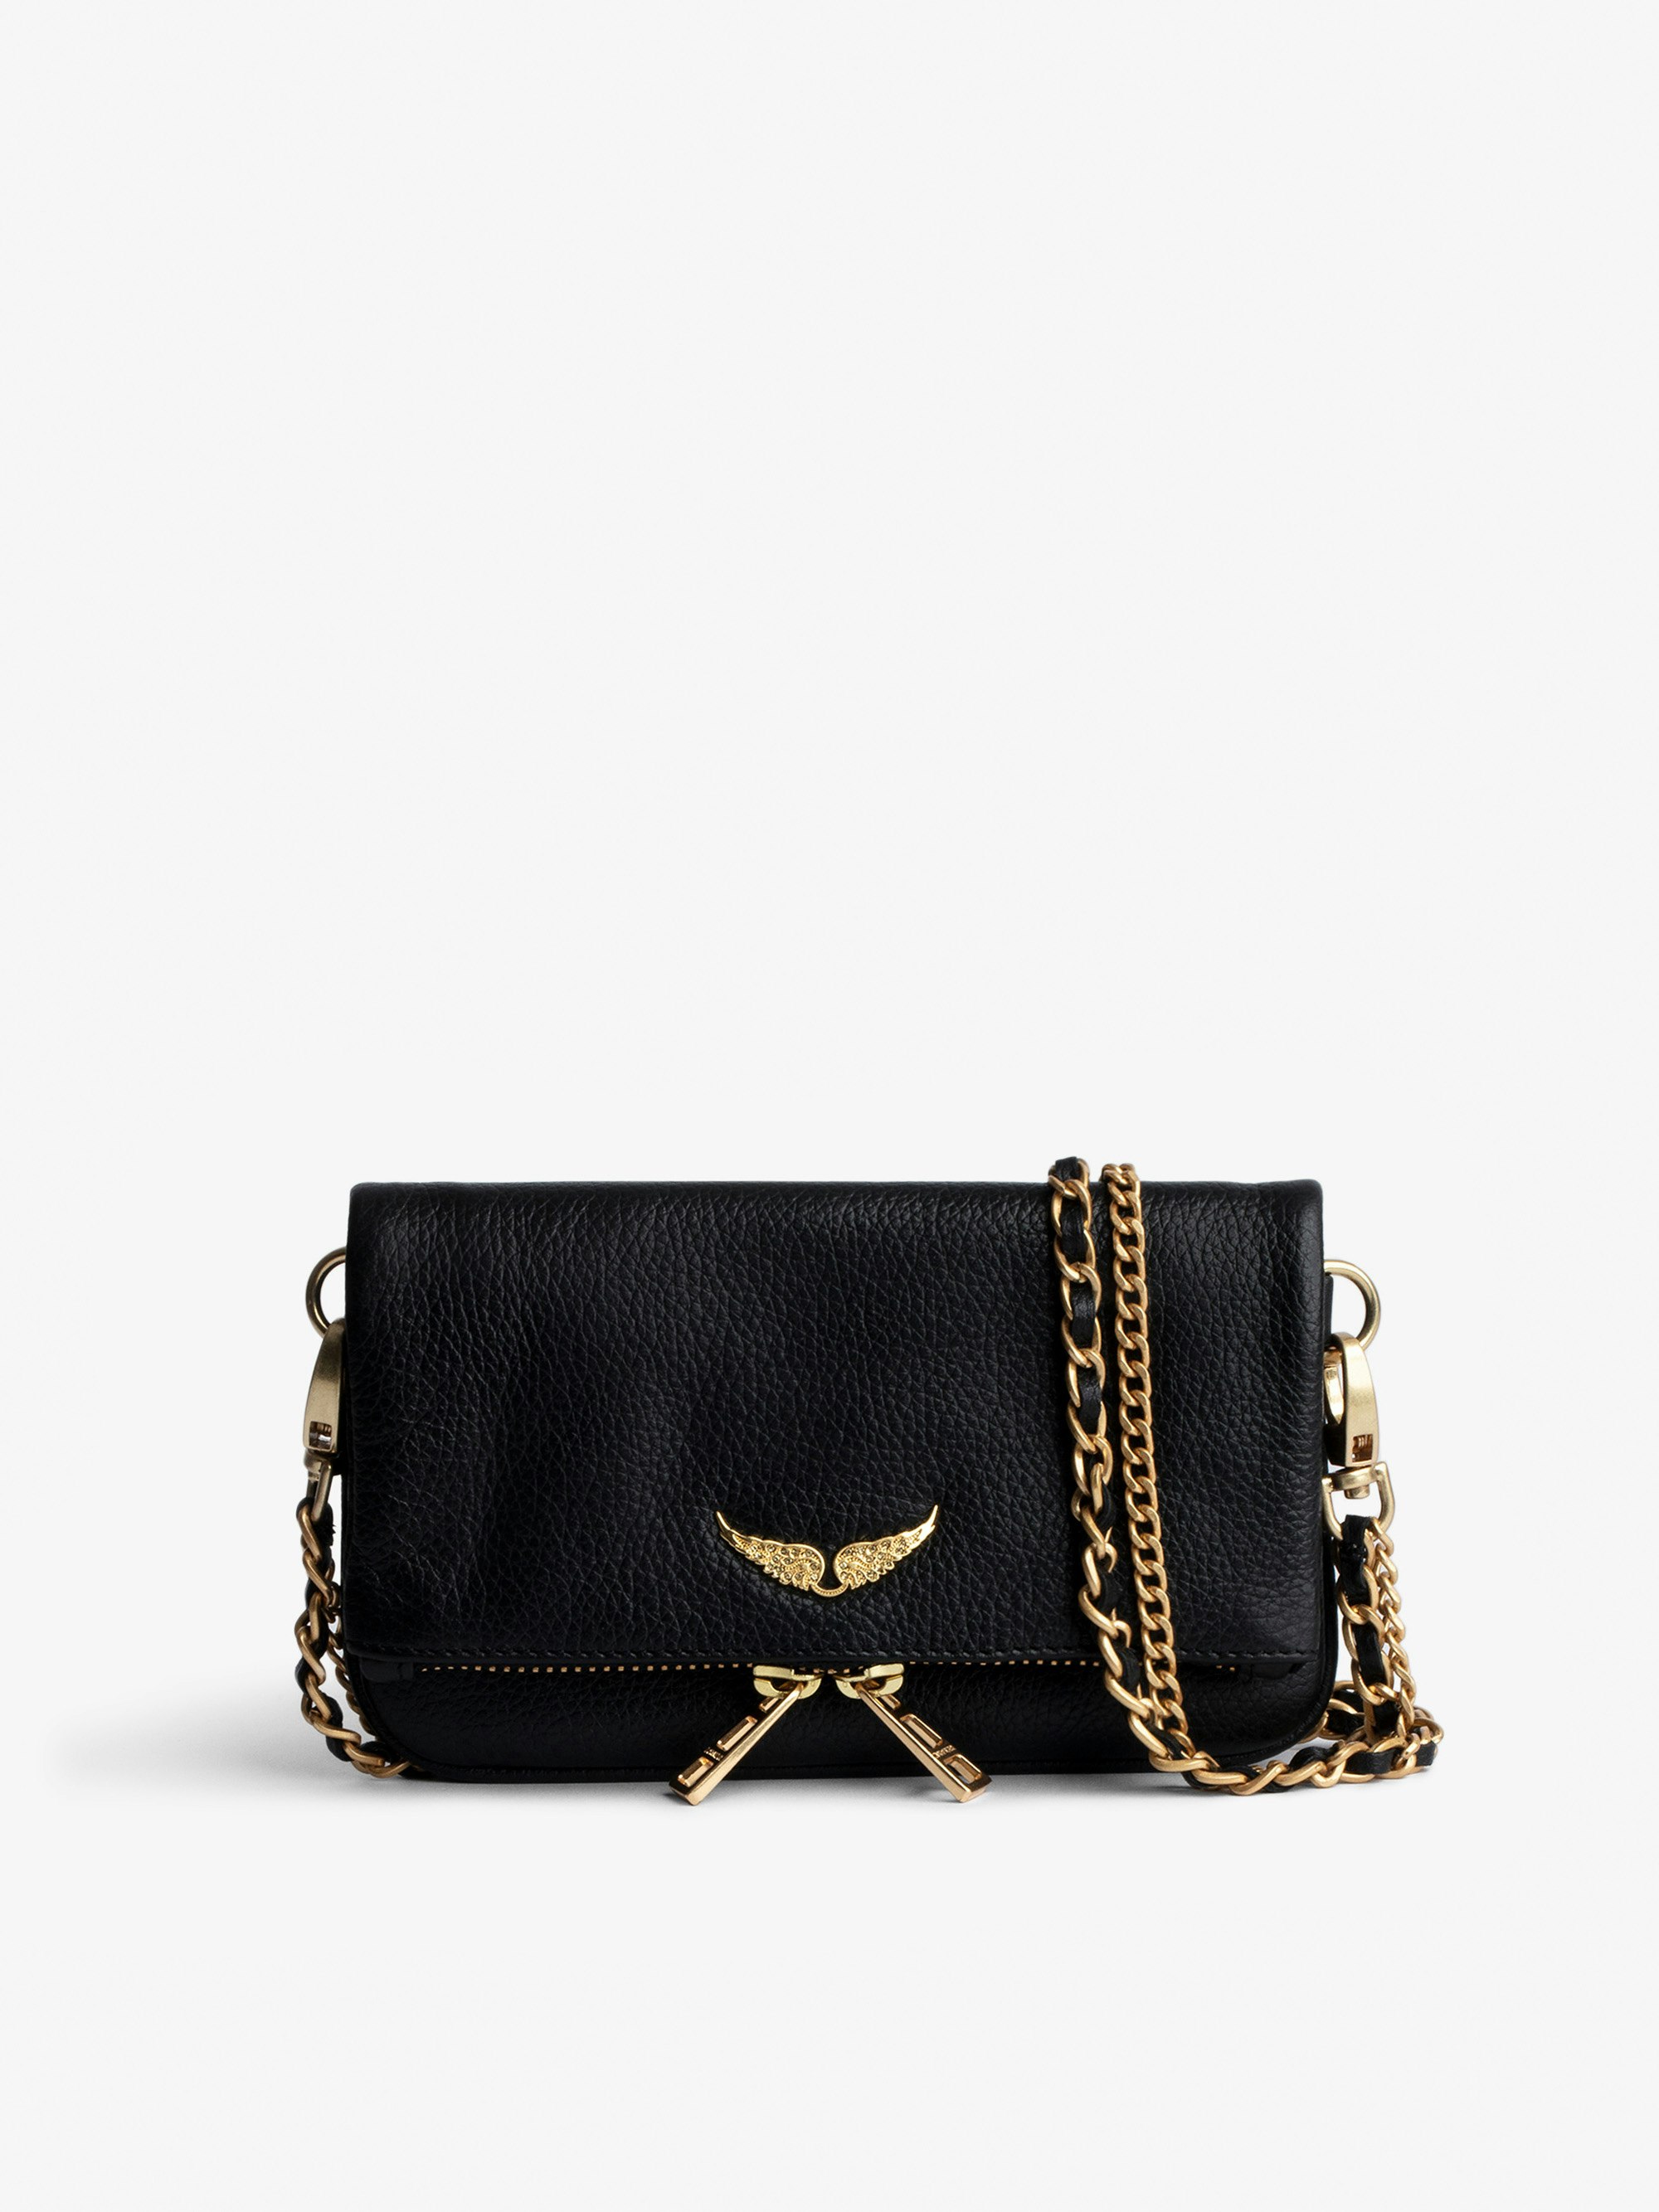 Rock Nano Grained Clutch - Women’s black grained leather Rock Nano clutch with leather shoulder strap and gold-toned chain